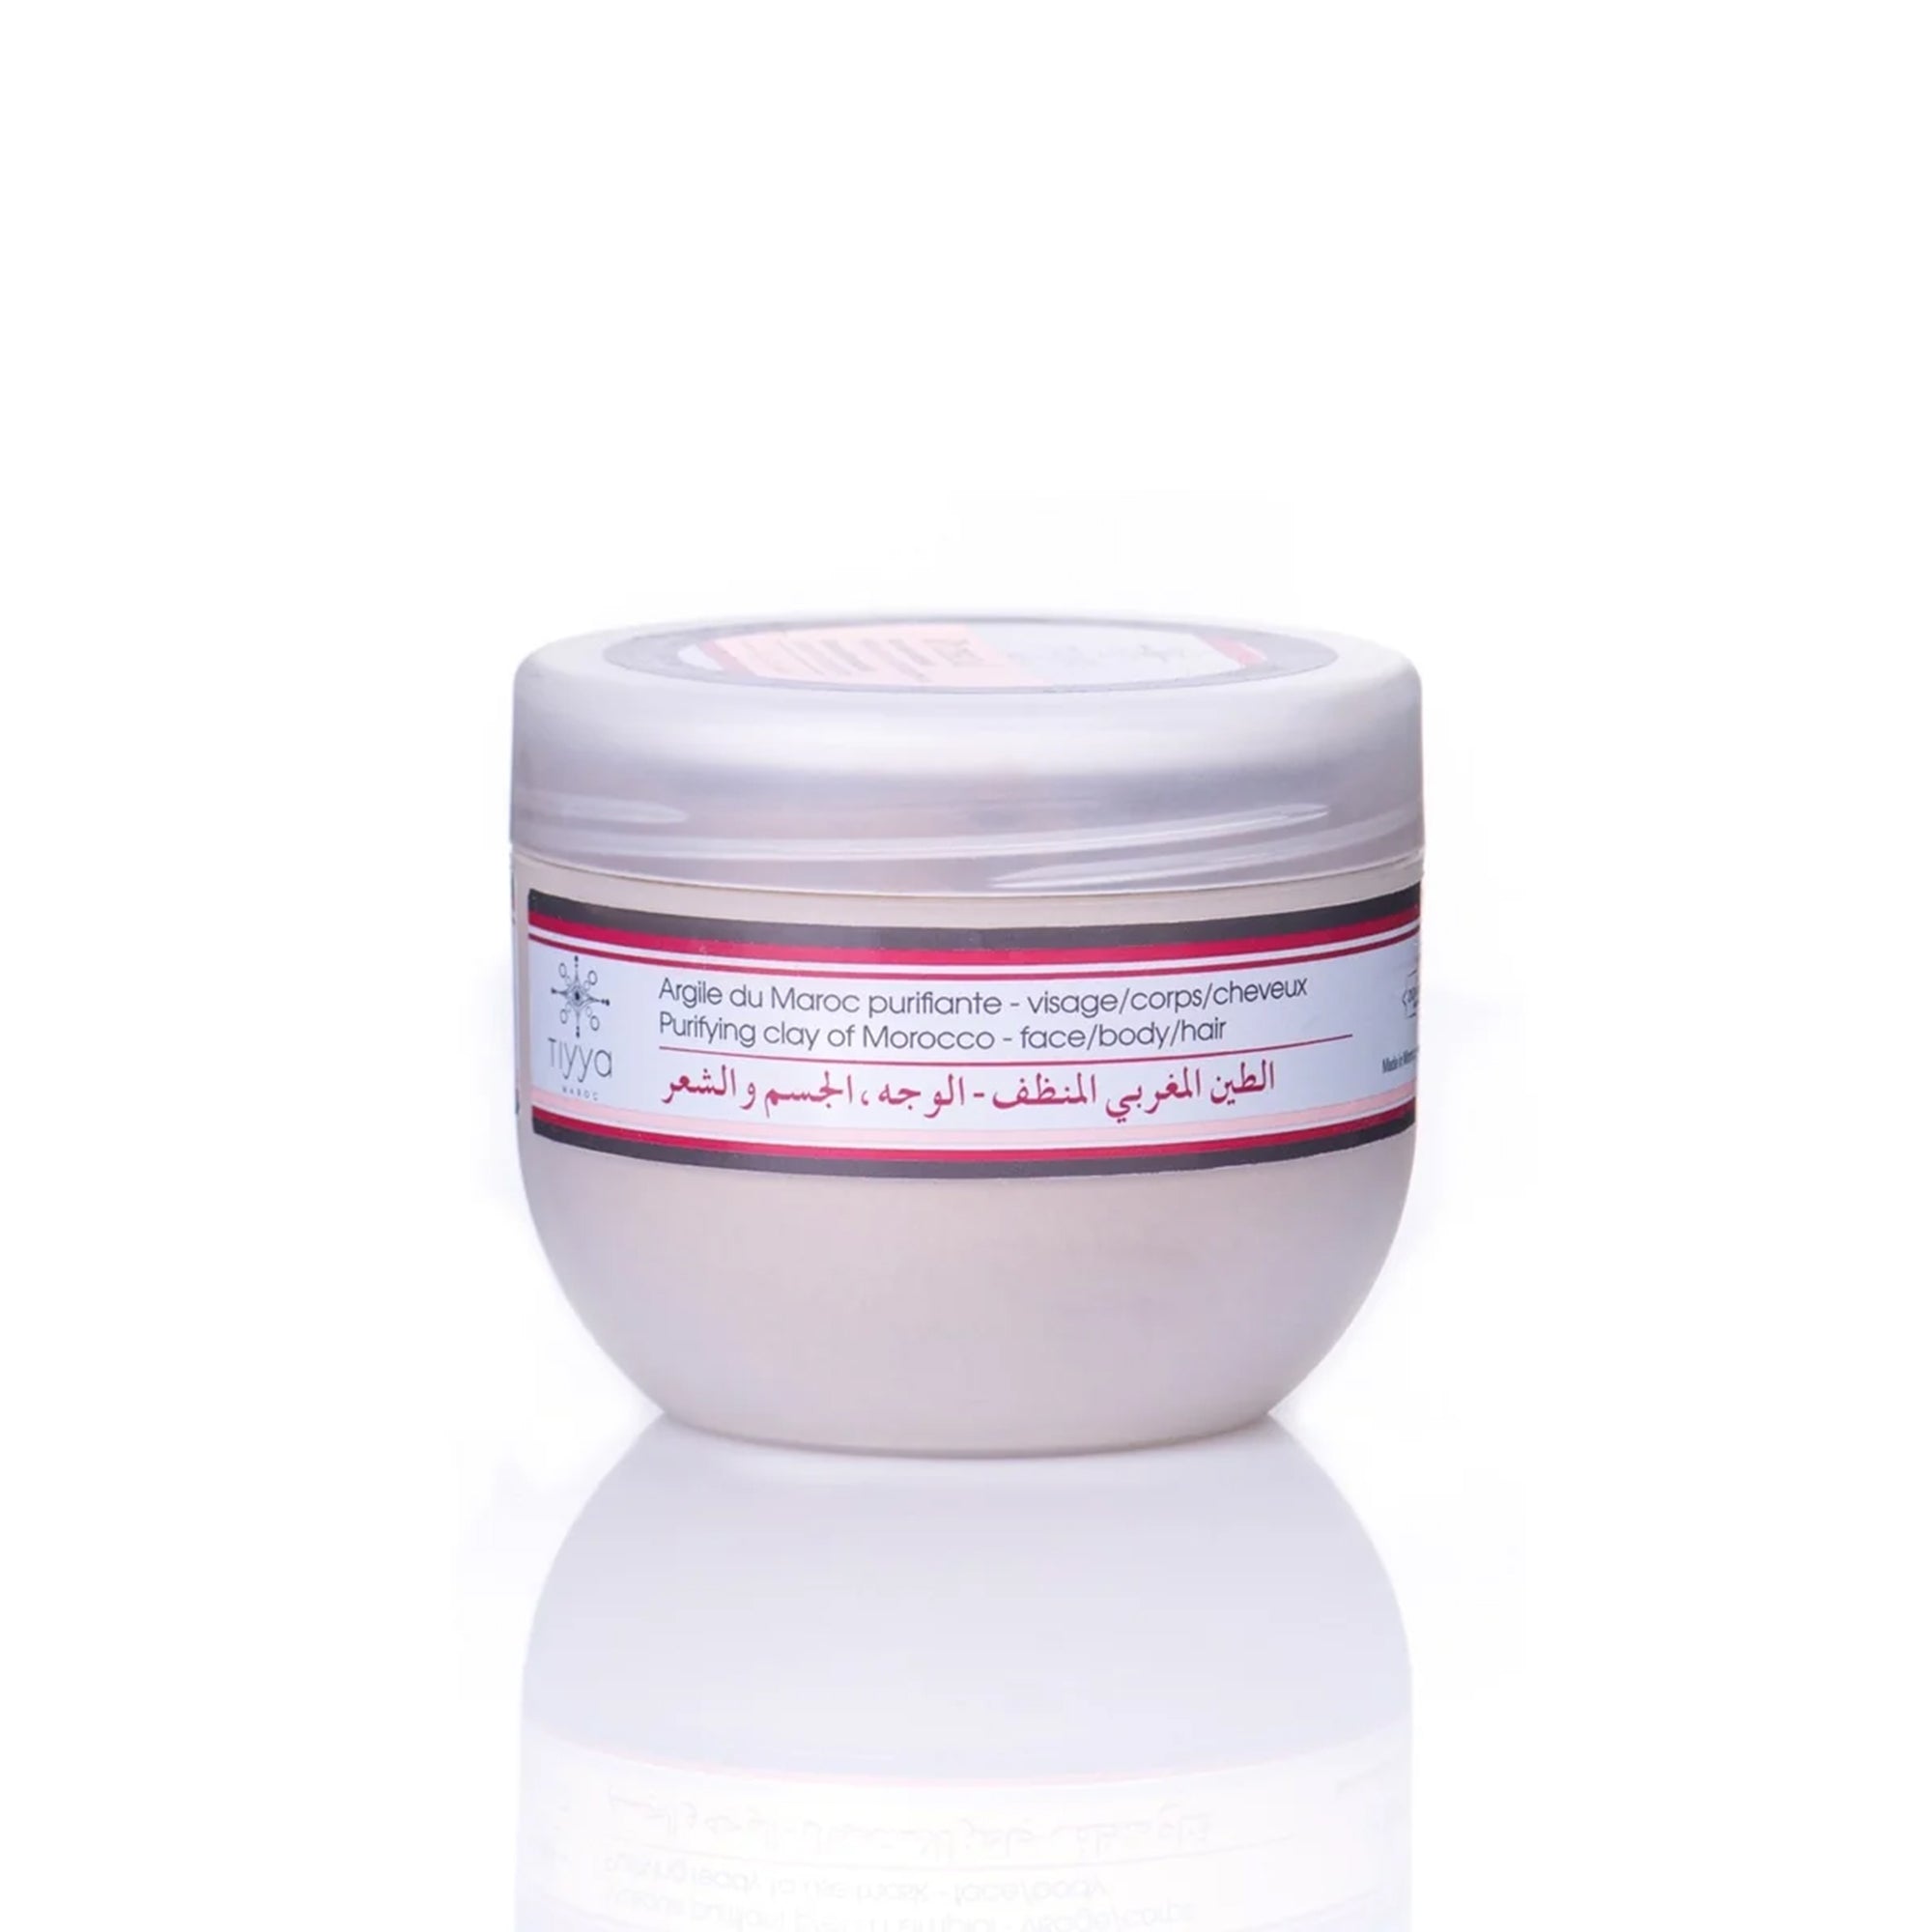 Rhassoul With Essential Oils Purifying Clay